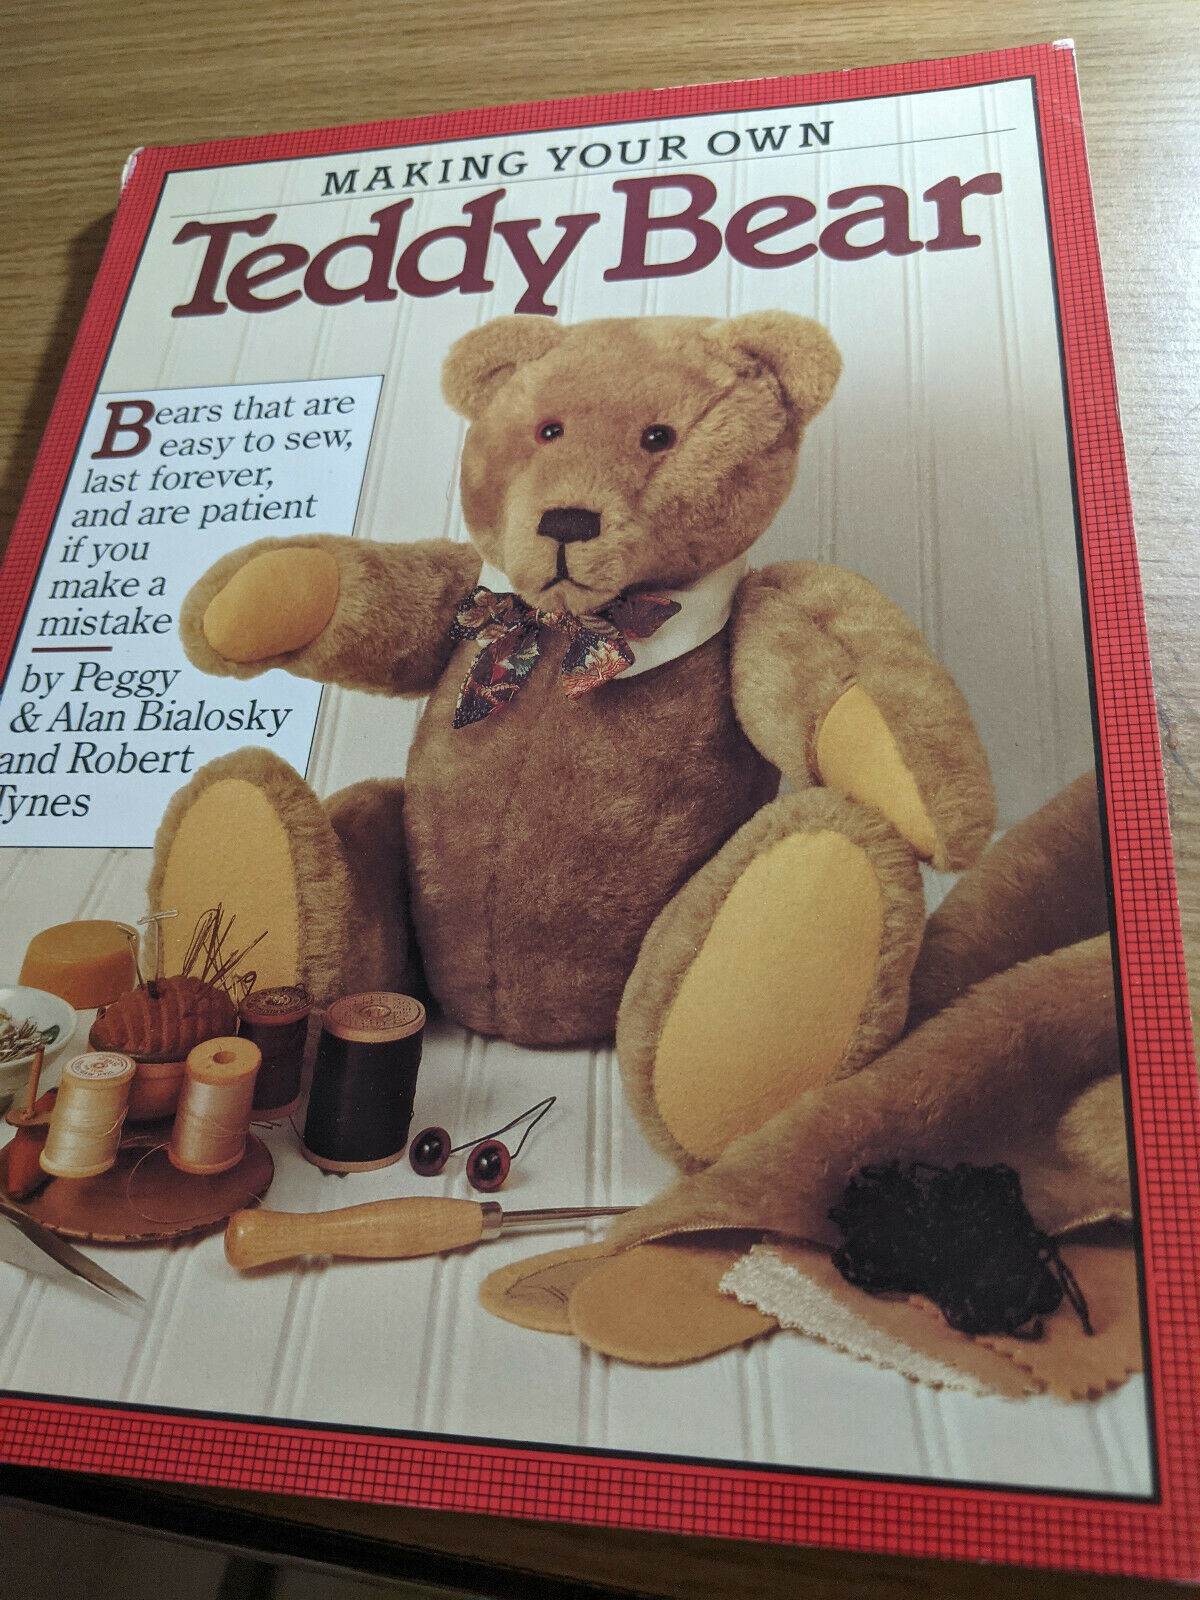 Making Your Own Teddy Bear By Peggy And Alan Bialosky And Robert Tynes